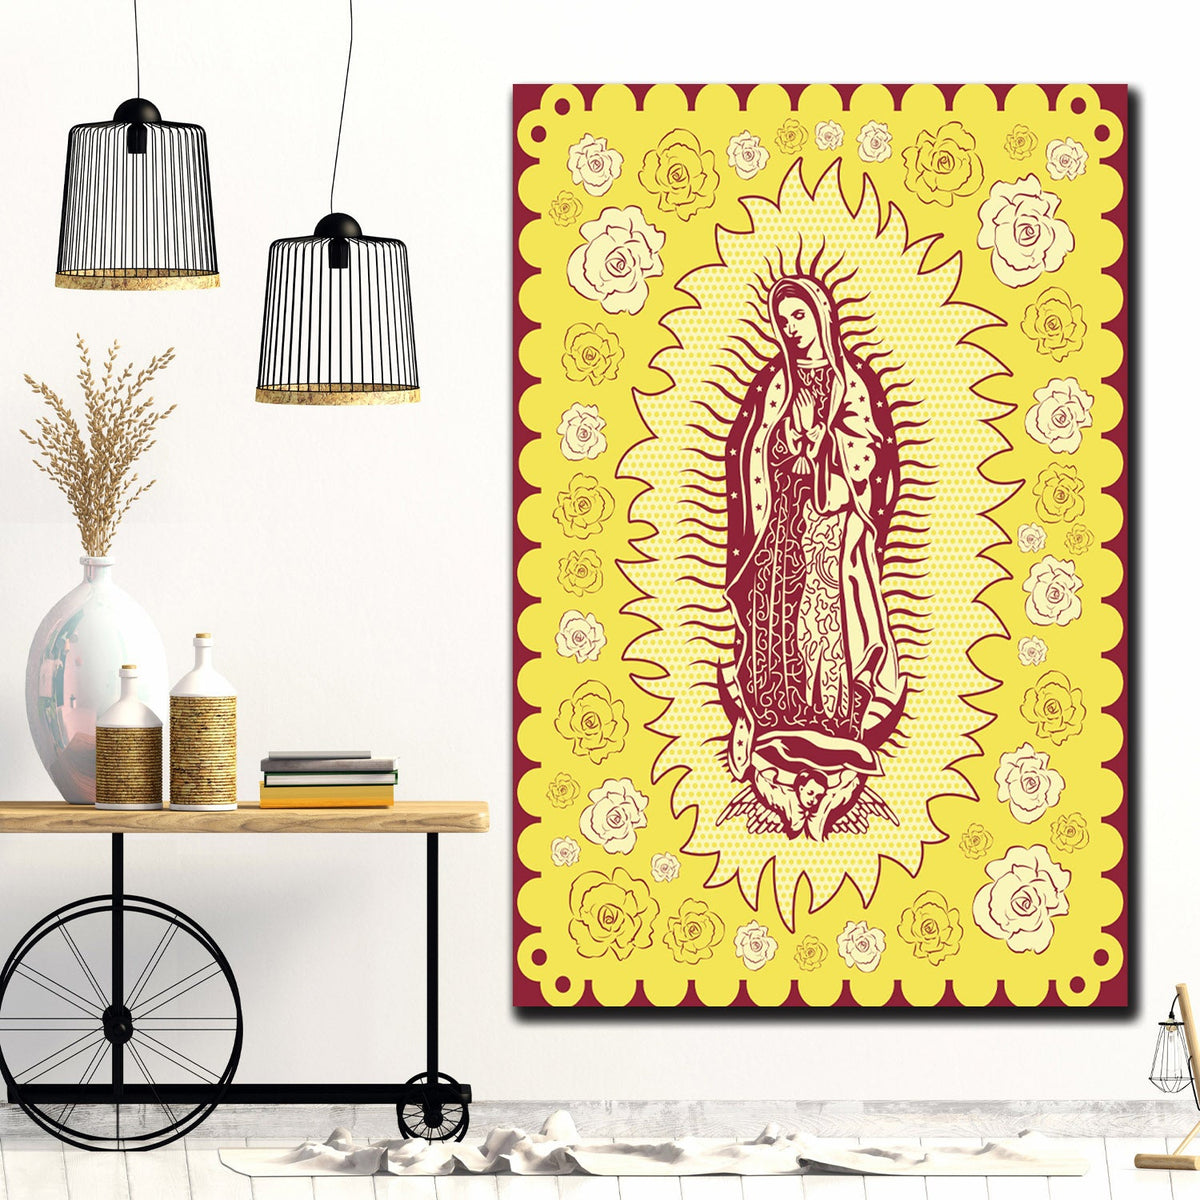 https://cdn.shopify.com/s/files/1/0387/9986/8044/products/OurLadyofGuadalupeCanvasArtprintStretched-4.jpg